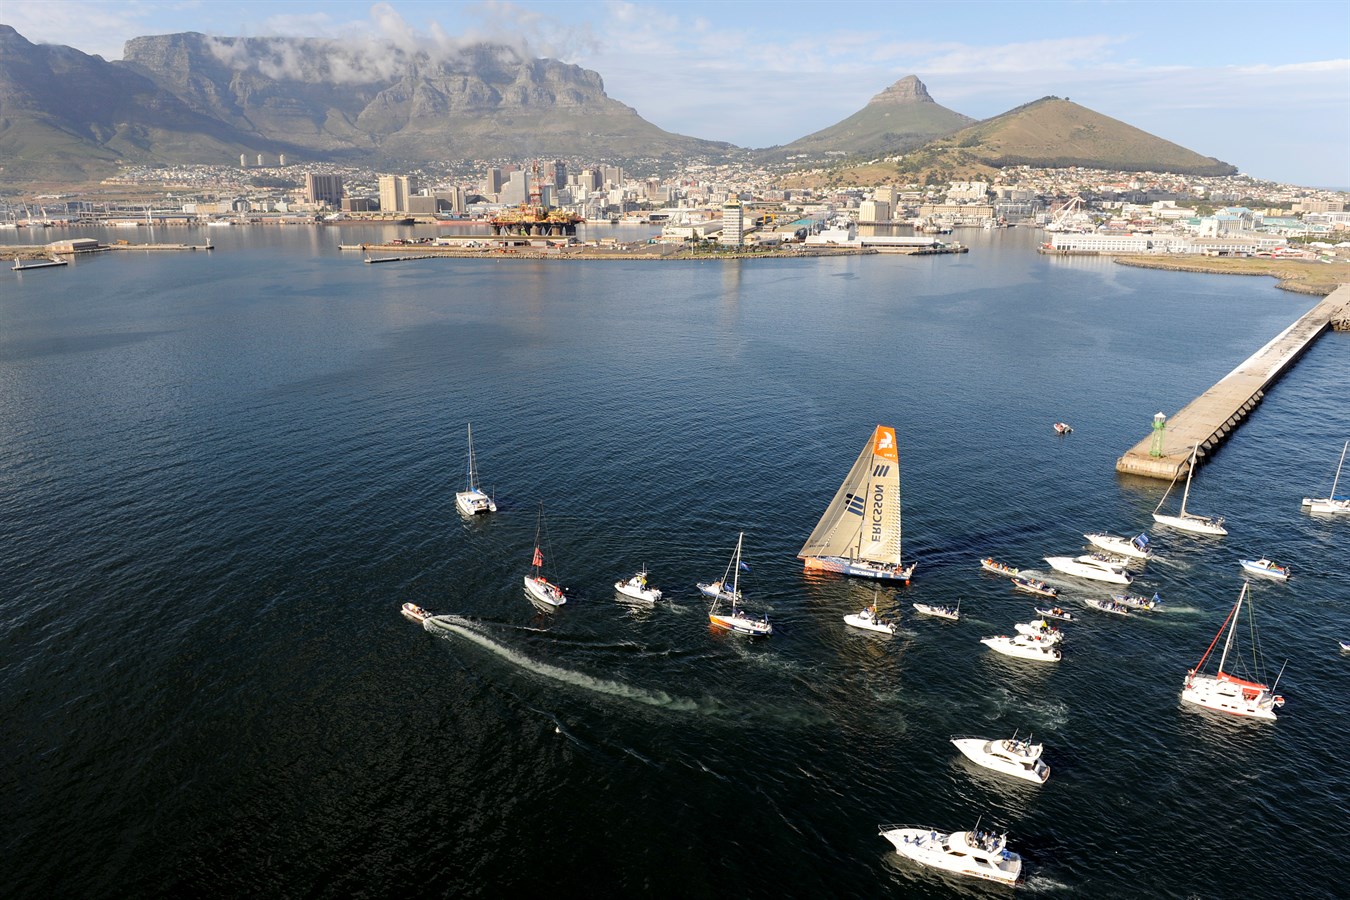 Ericsson 4 wins leg one of the Volvo Ocean Race into Cape Town, 2 ...